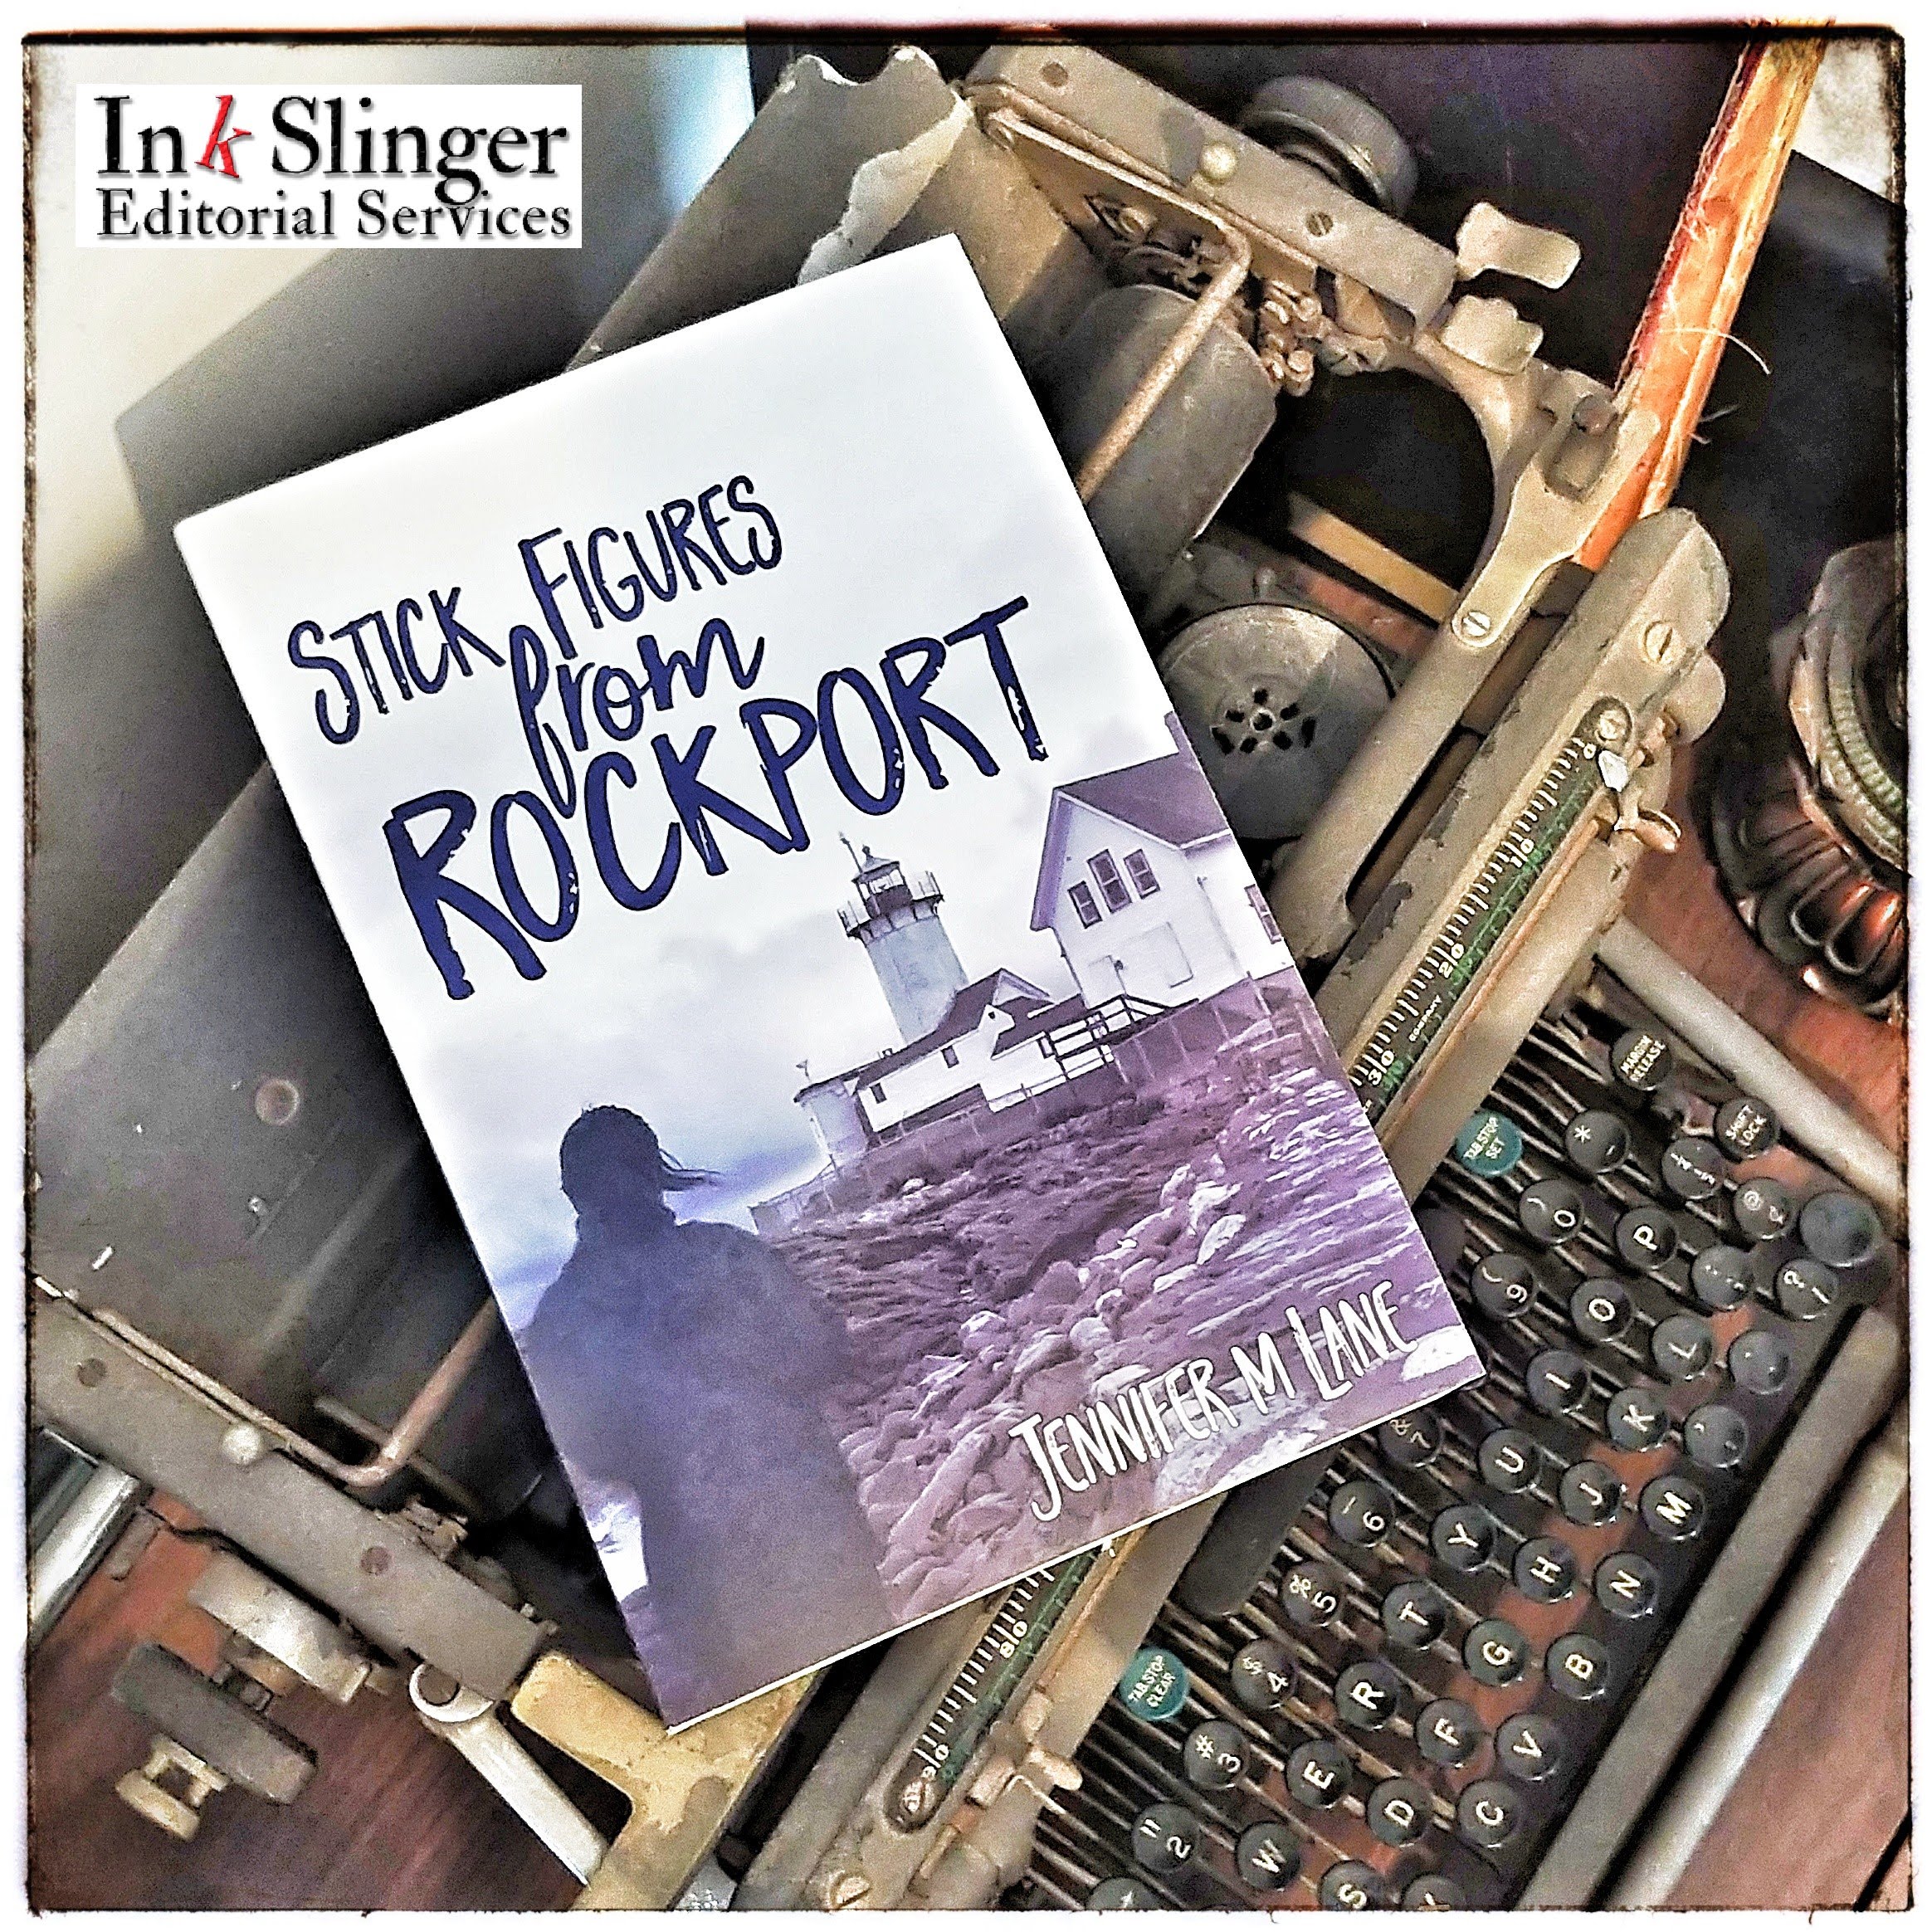 Stick Figures from Rockport book lying on an antique typewriter with Ink Slinger logo in the top left corner.